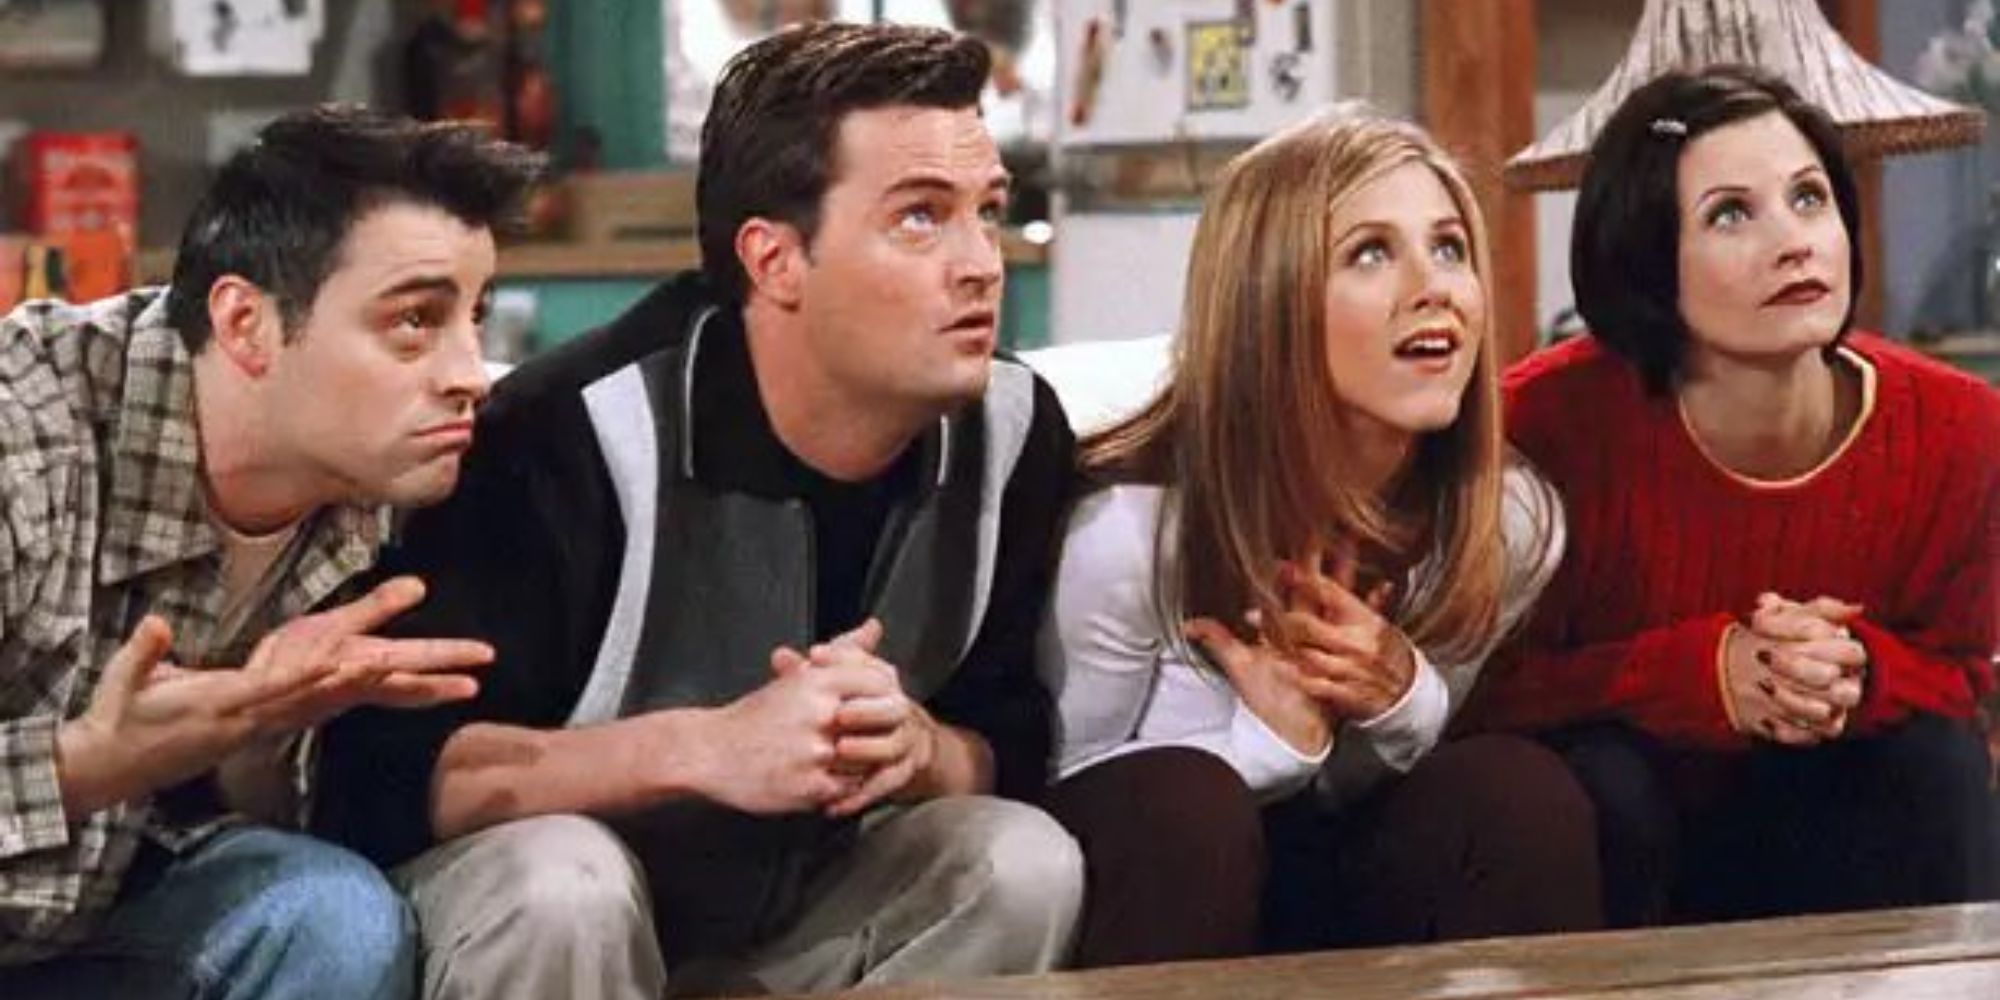 Joey (Matt LeBlanc), Chandler (Matthew Perry), Rachel (Jennifer Aniston), and Monica (Courteney Cox) sitting on the couch looking up expectantly in Frineds